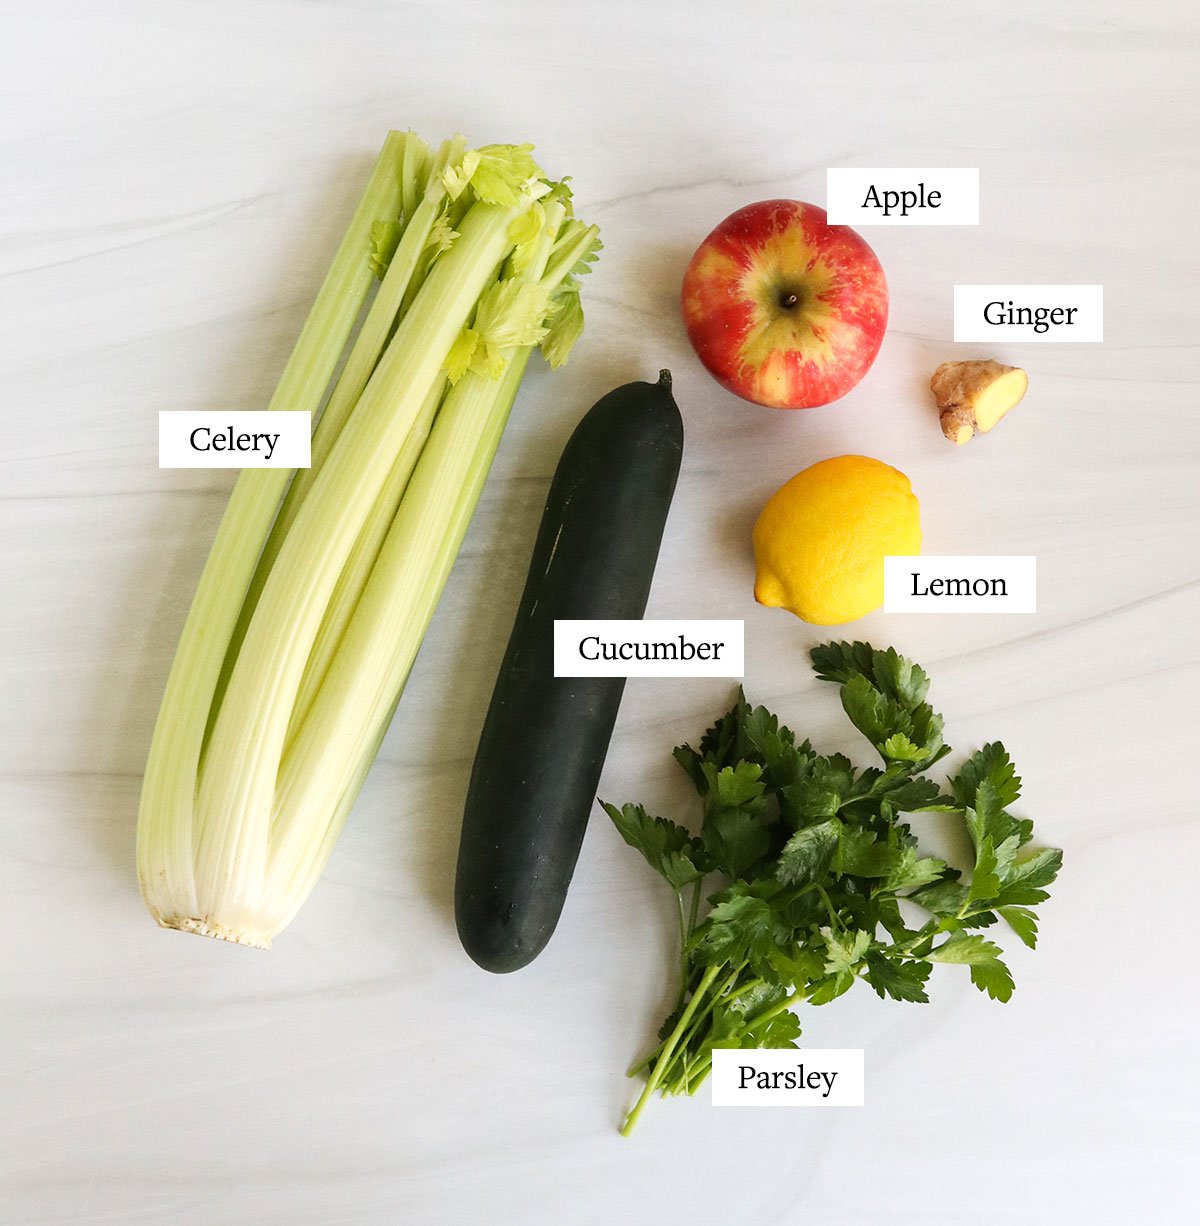 detox juice ingredients labeled on a white surface.